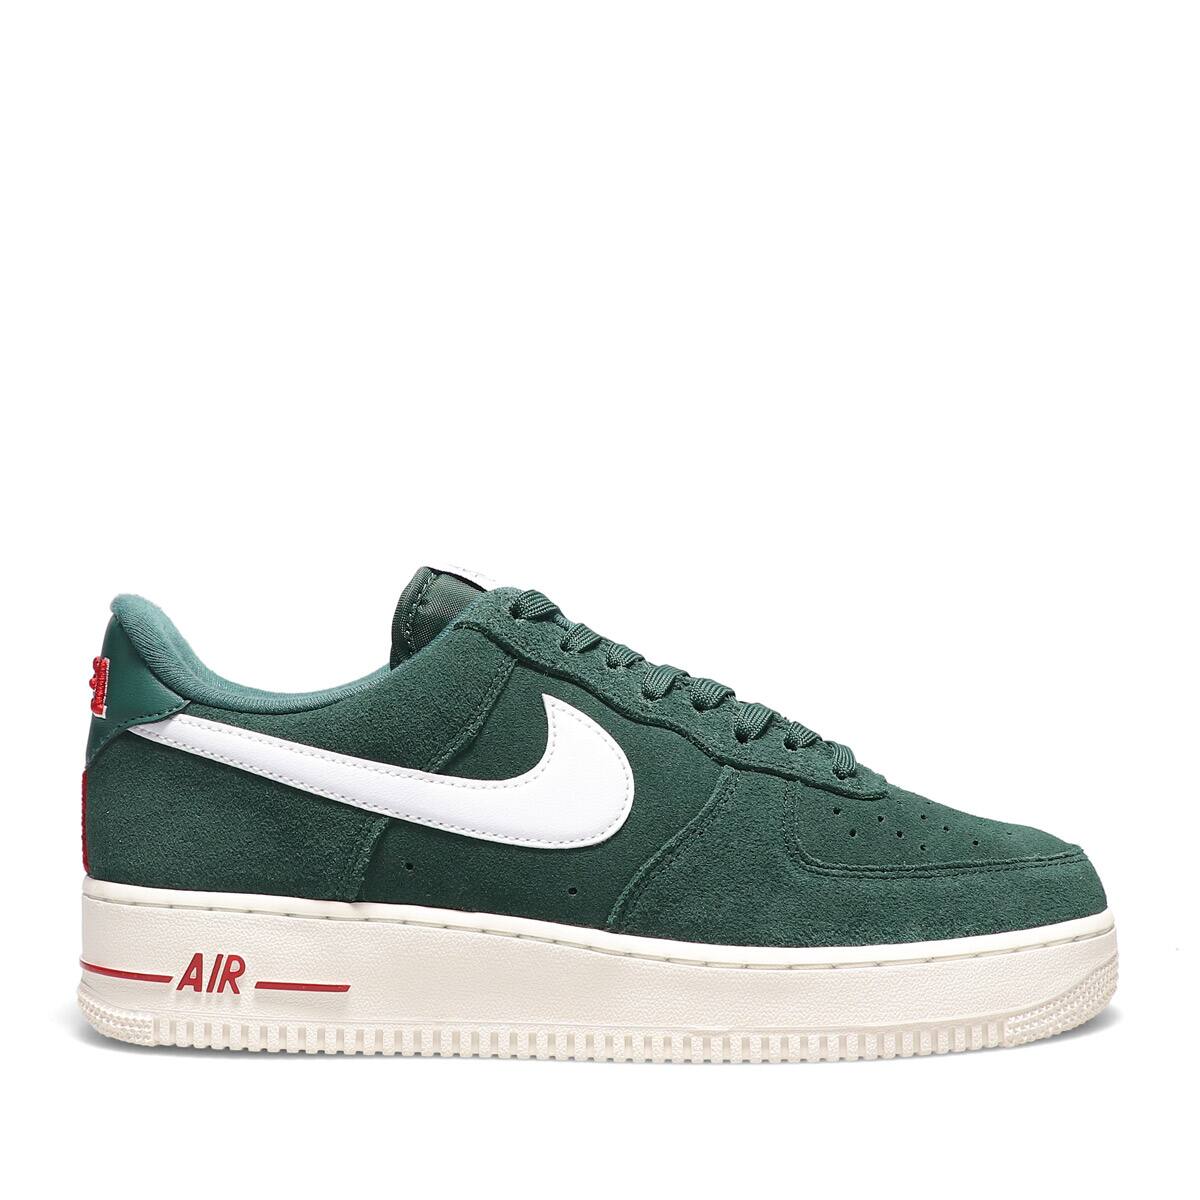 NIKE AIR FORCE 1 '07 LX PRO GREEN/WHITE-SAIL-GYM RED 22SP-I